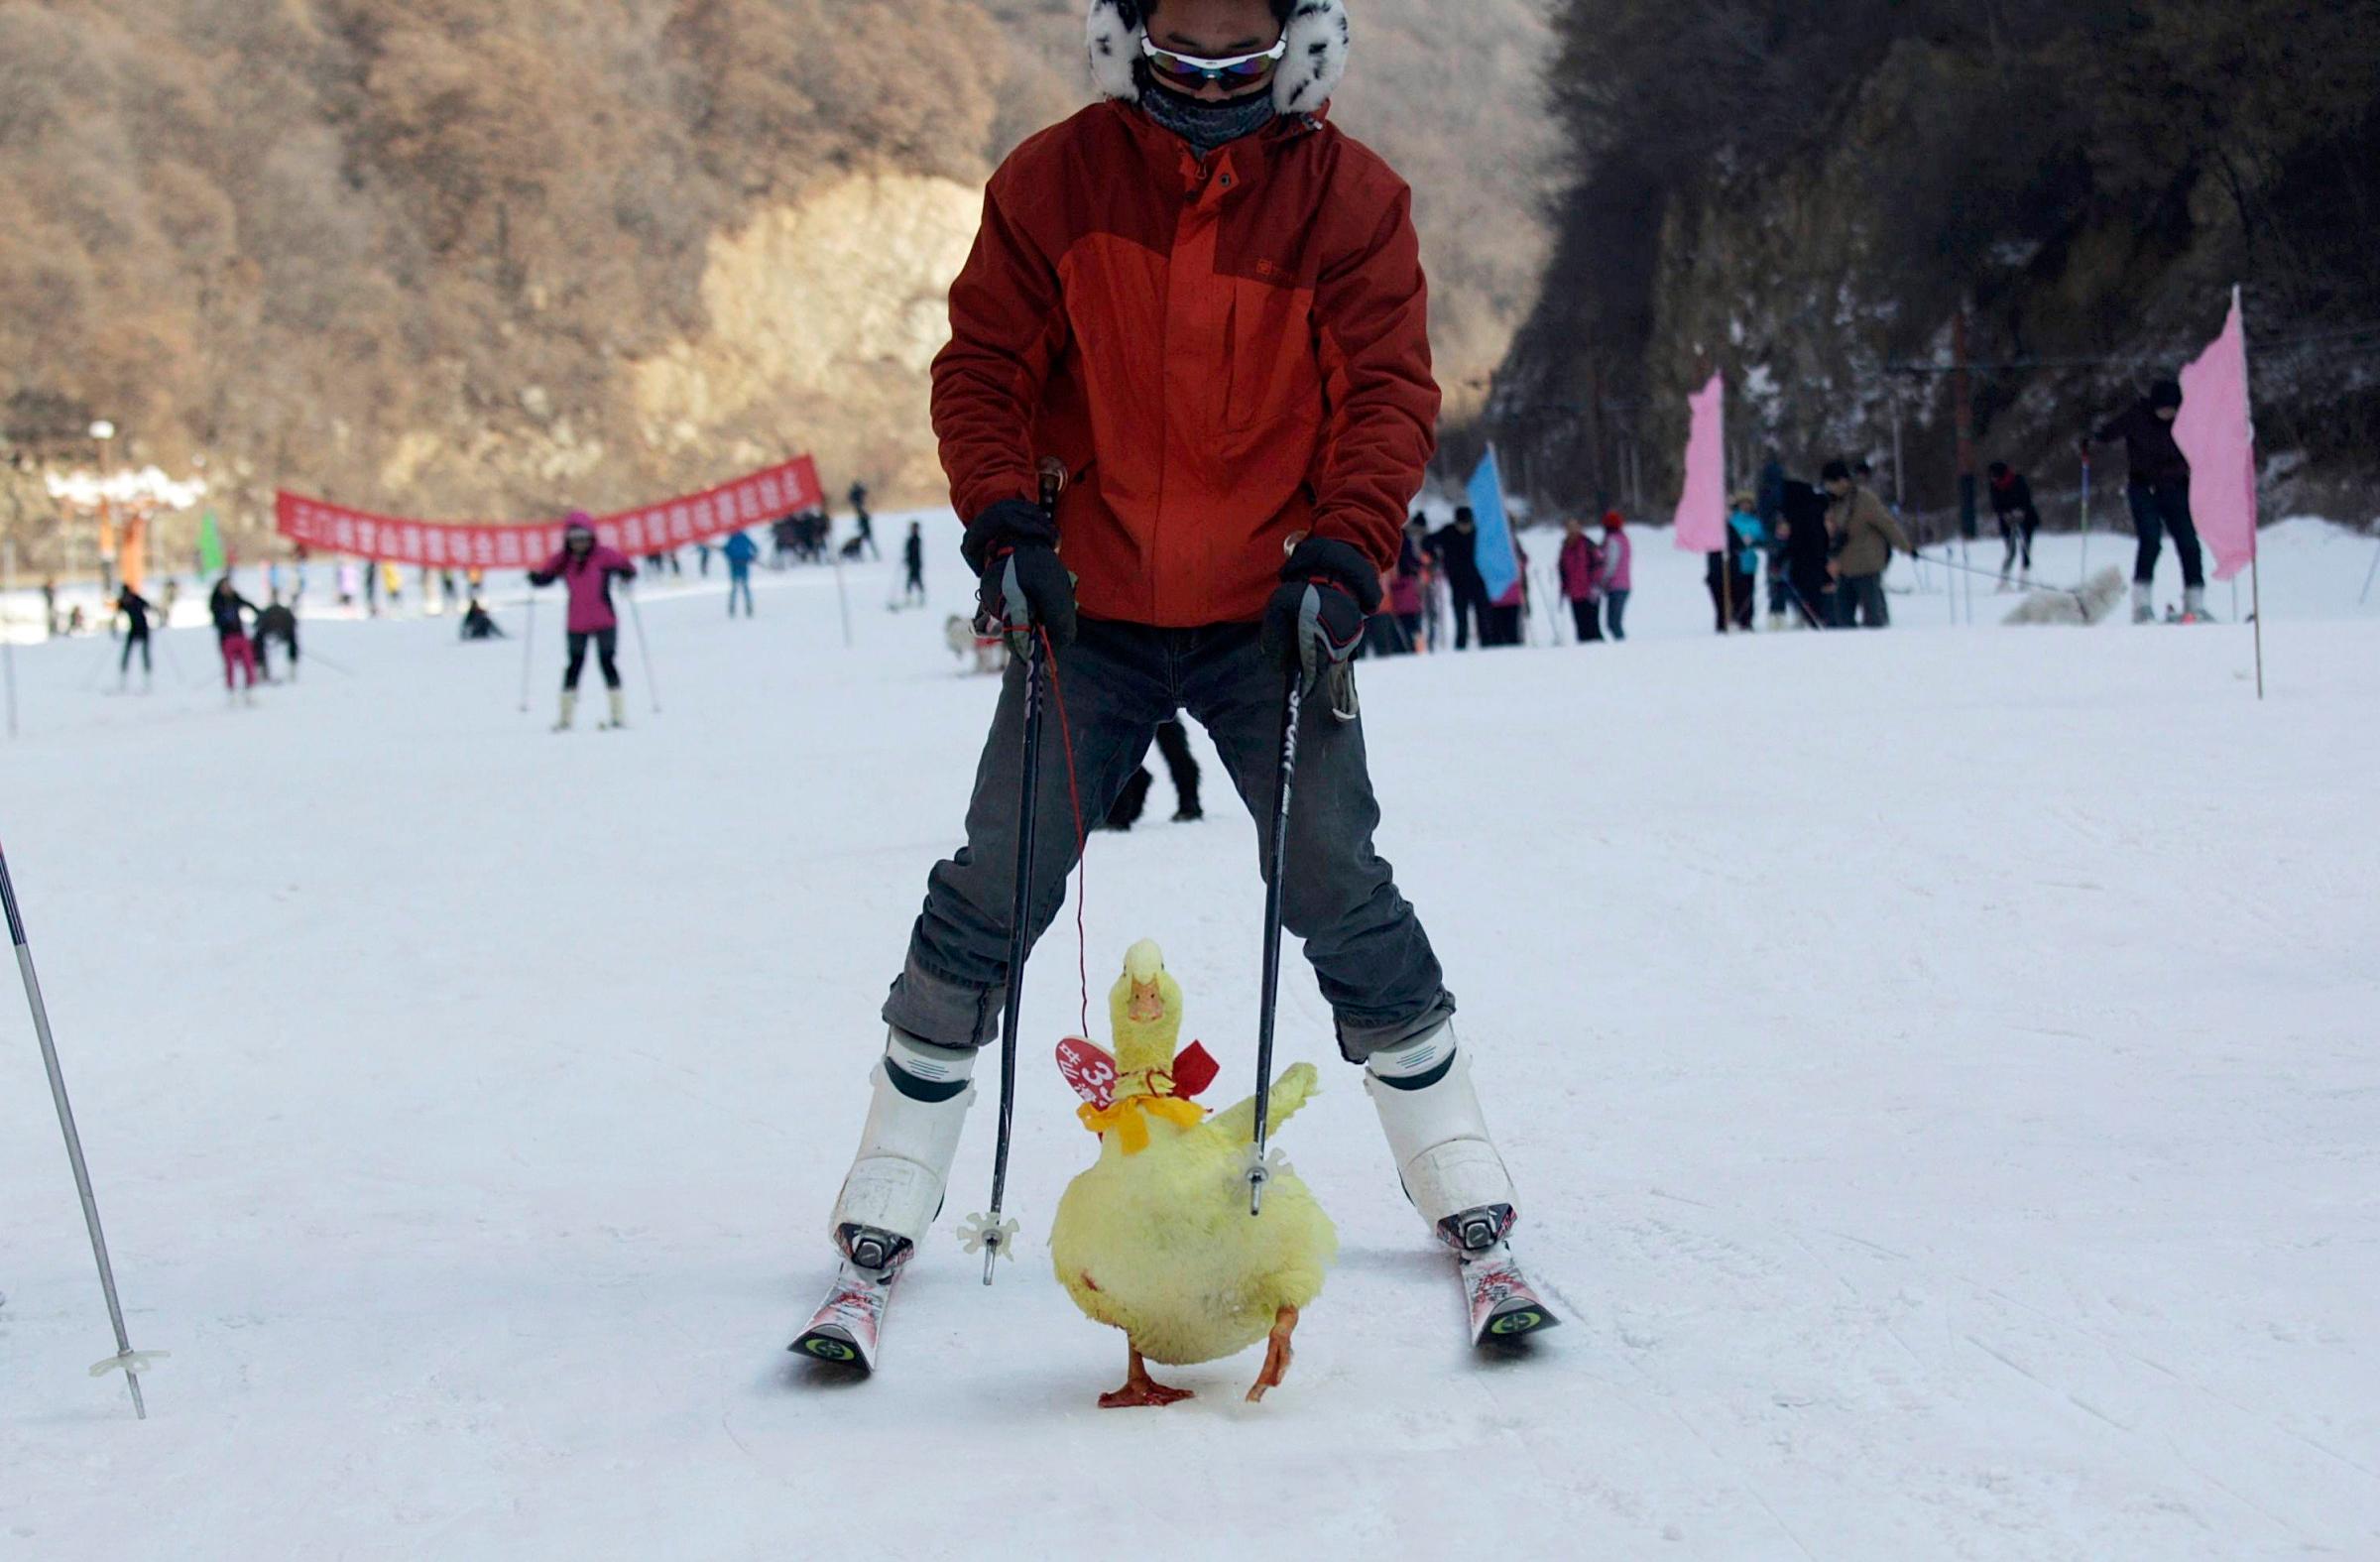 A contestant skis with his pet duck during a skiing-with-pets competition at a ski resort in Sanmenxia, Henan province, Jan. 12, 2014.